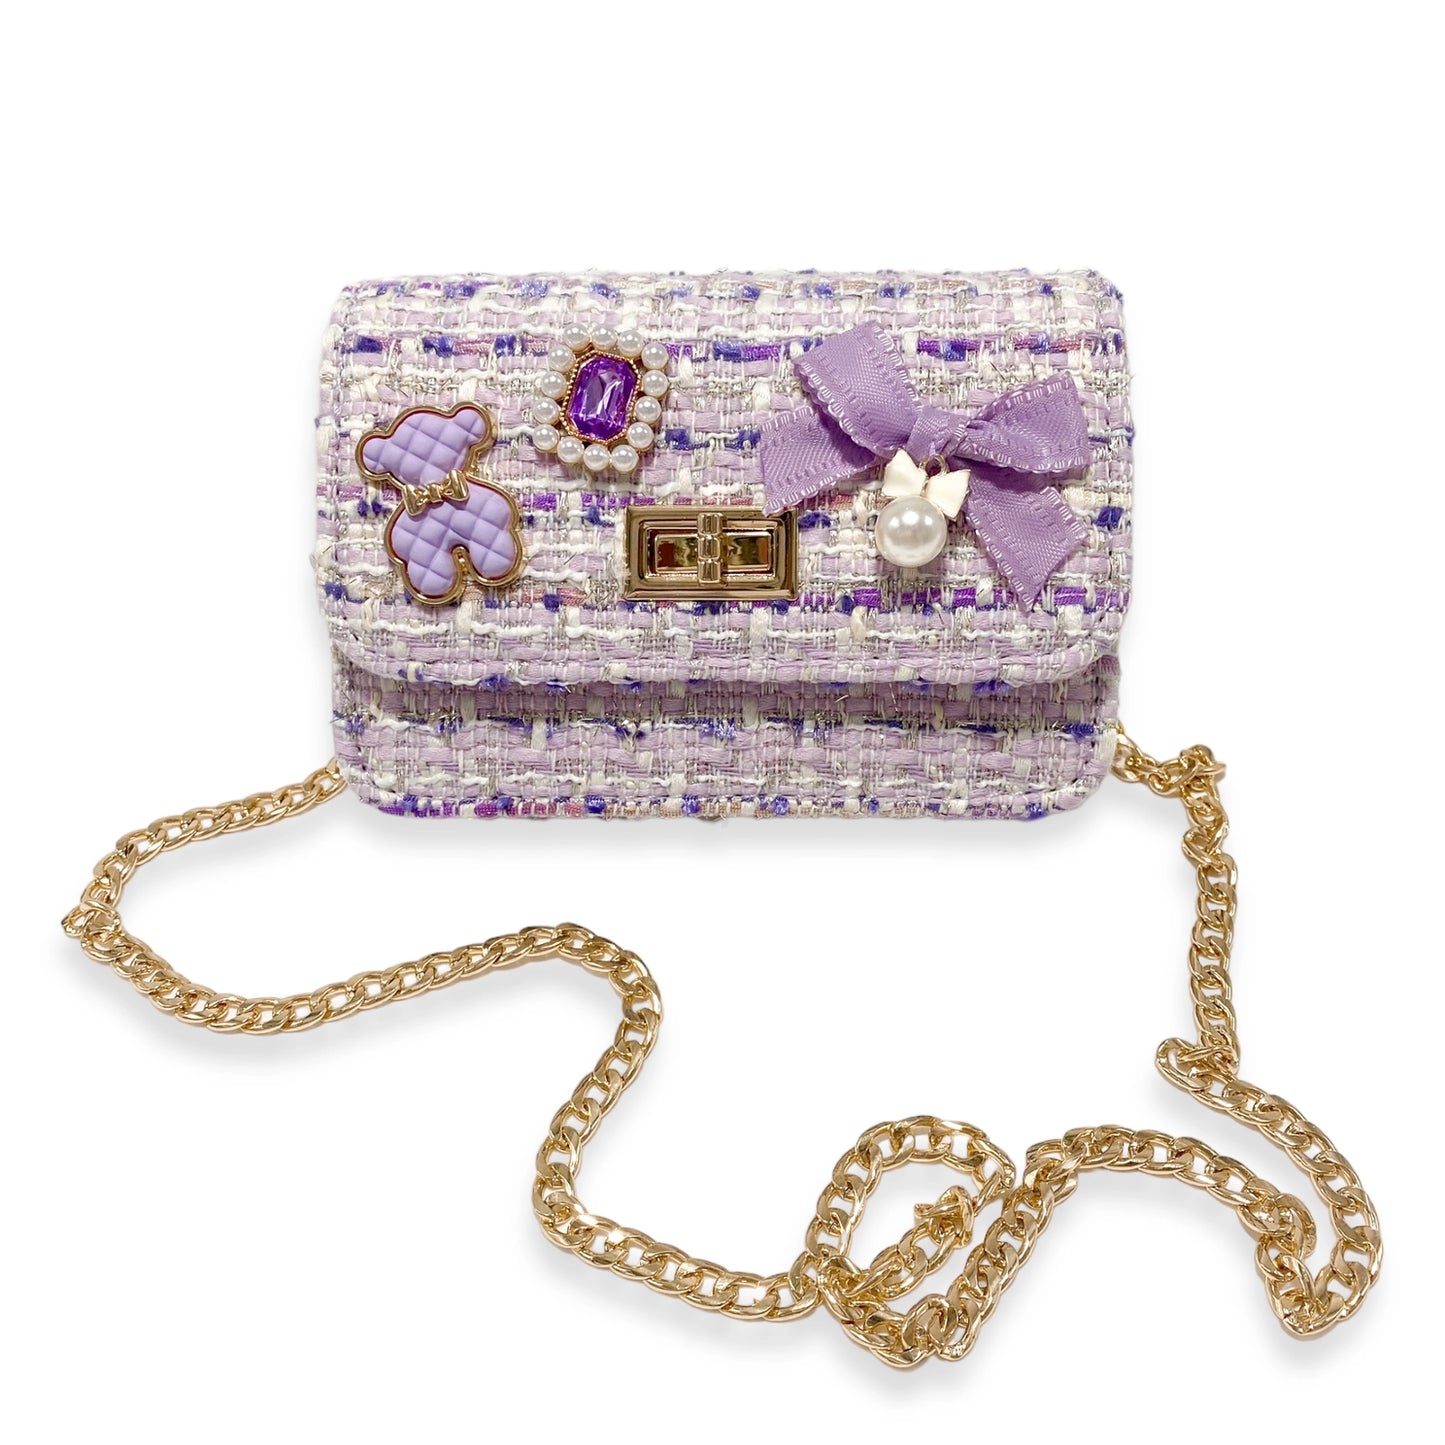 Lilac Teddy Charms Tweed Purse with Gold Chain Strap